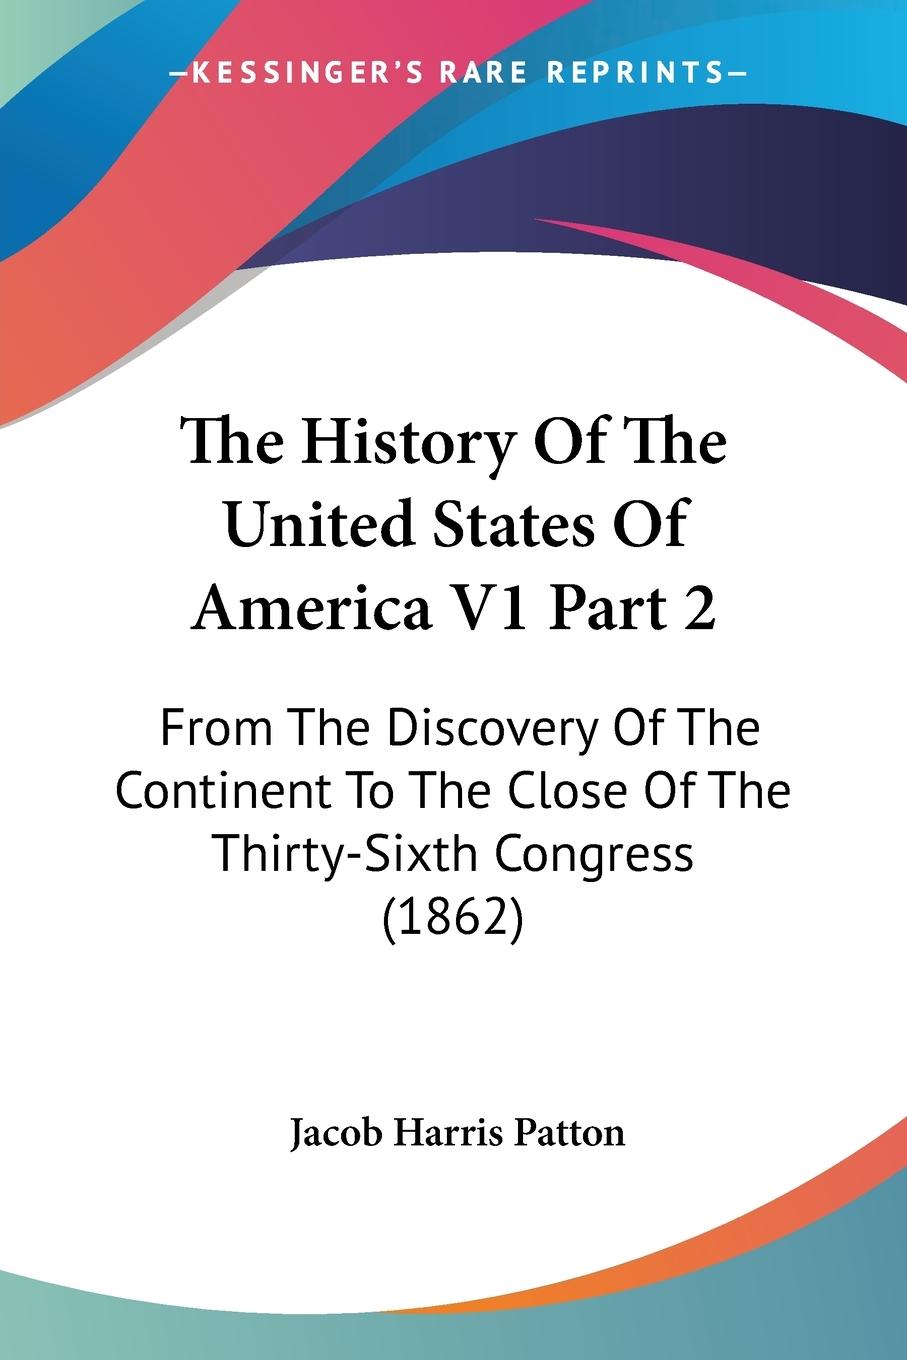 The History Of The United States Of America V1 Part 2 - Patton, Jacob Harris